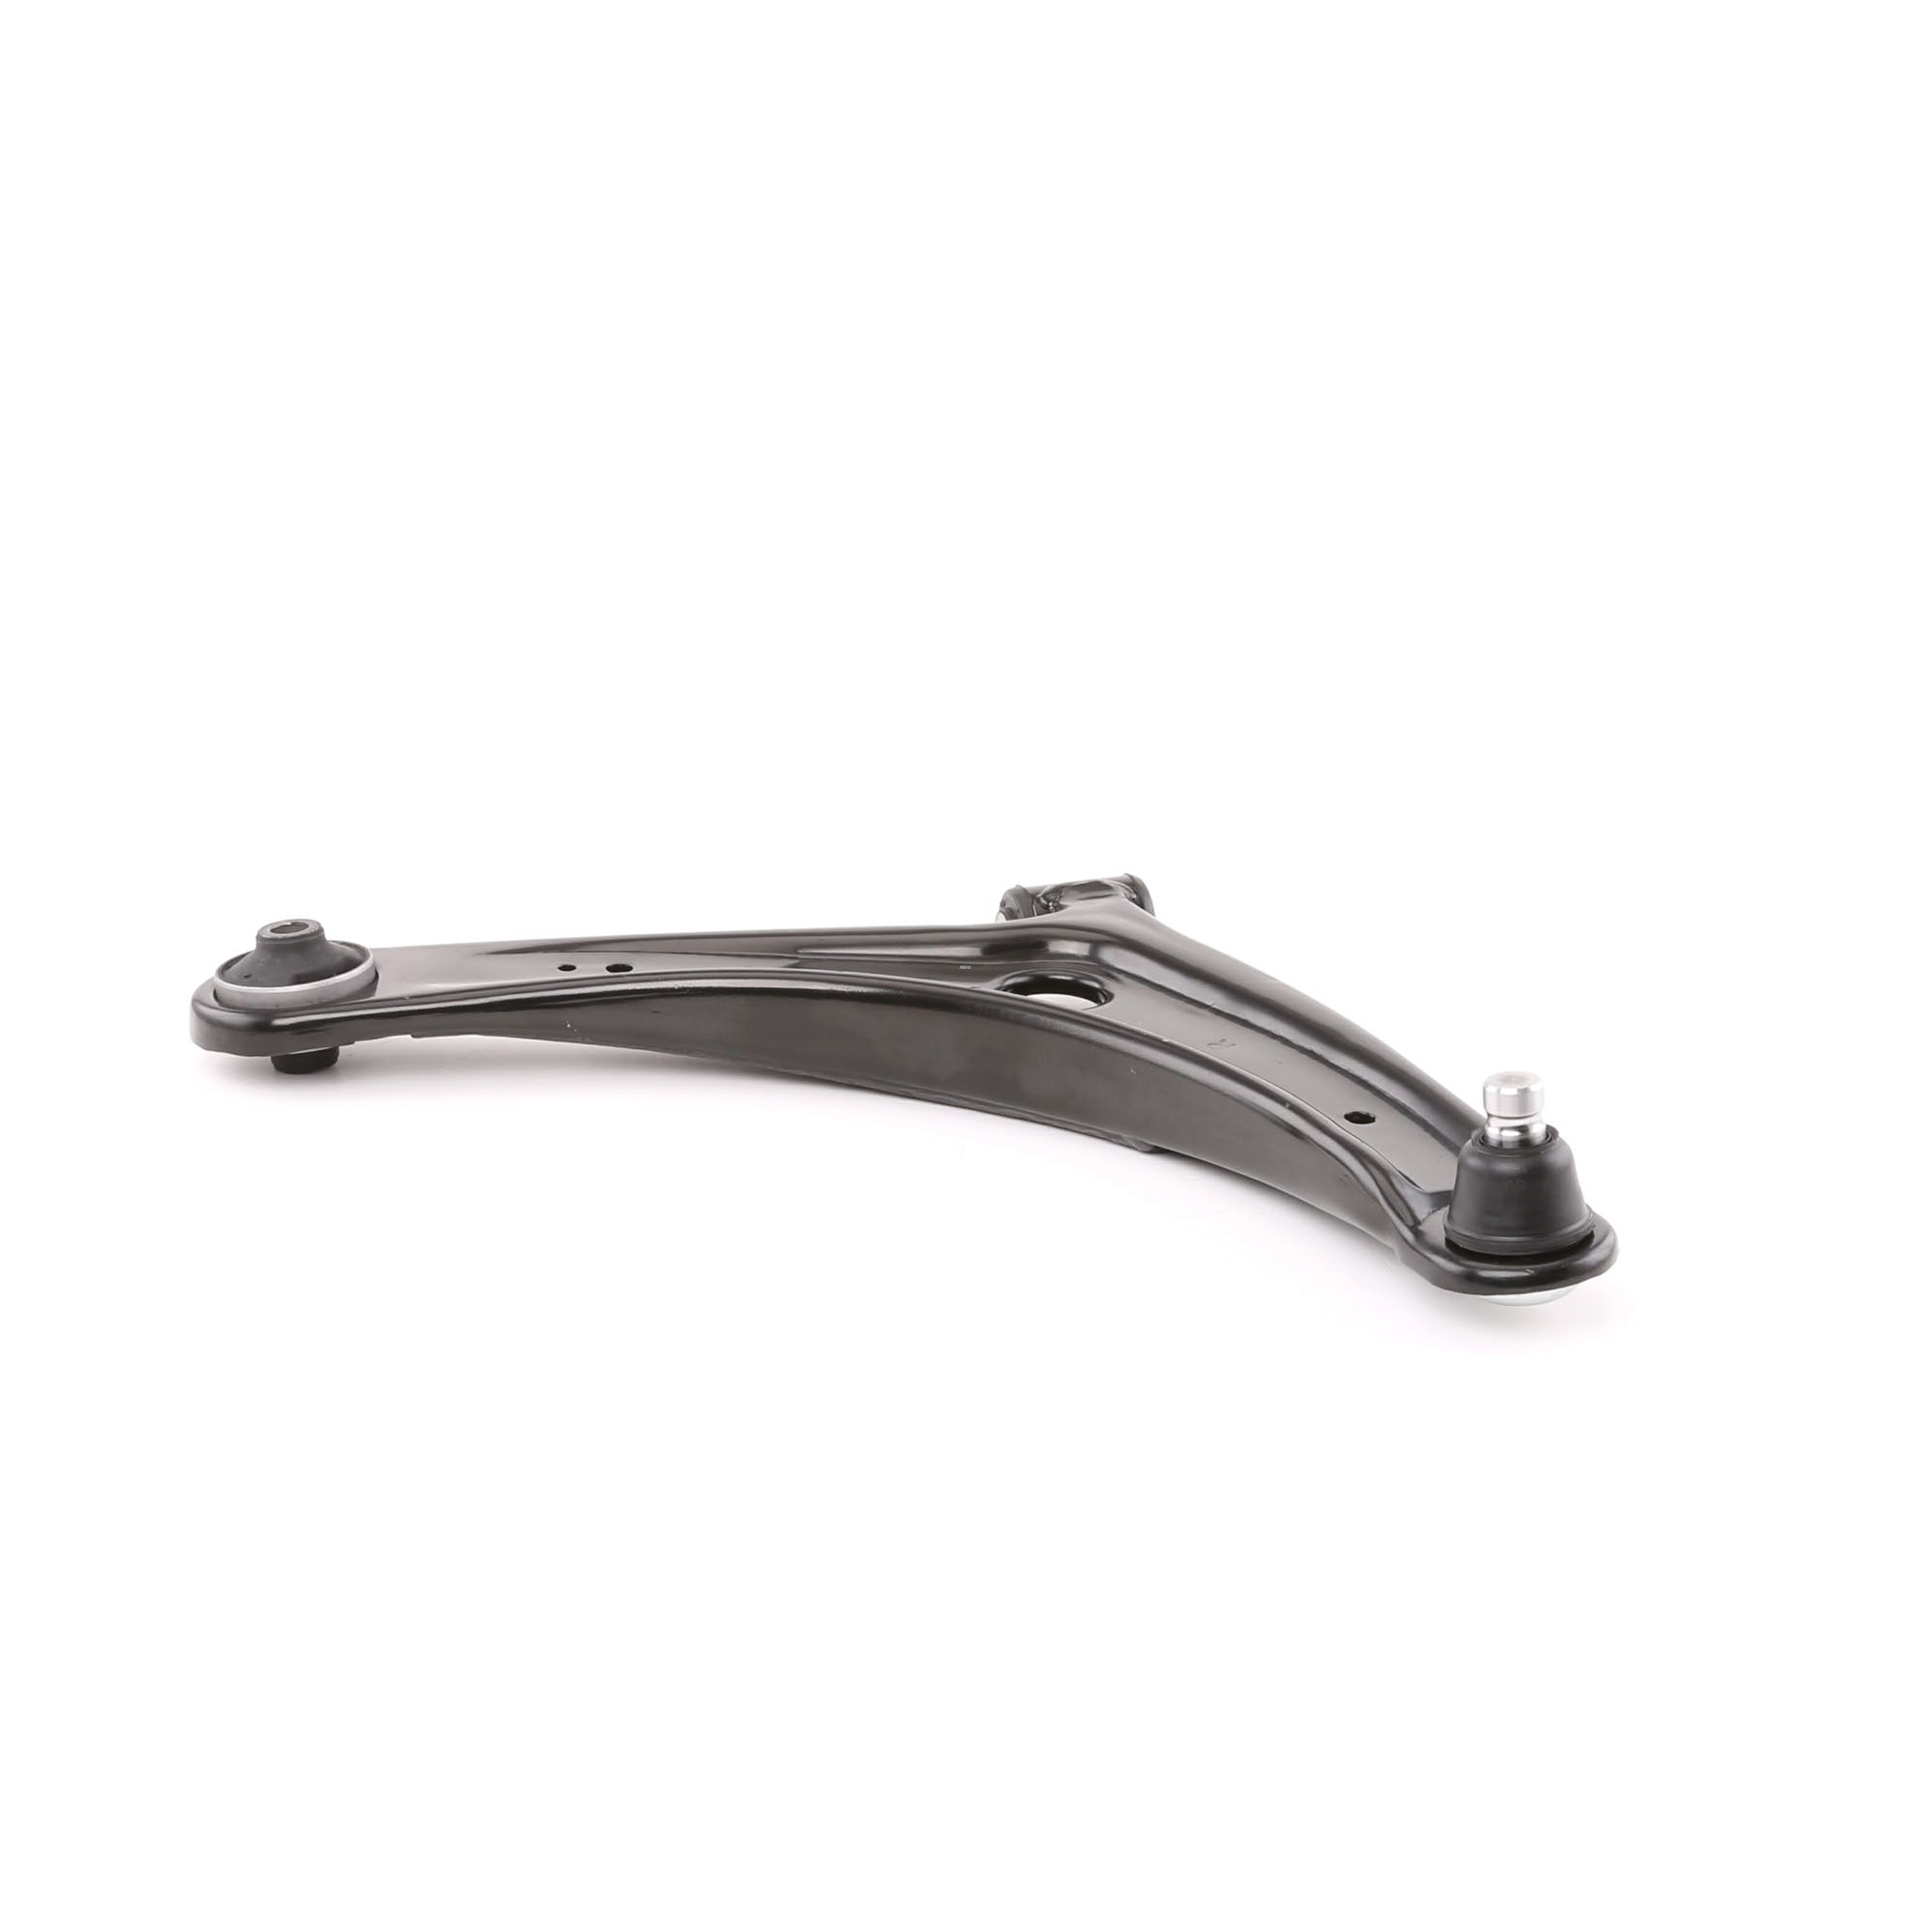 A.B.S. Control arms rear and front 4008 Off-Road new 211211